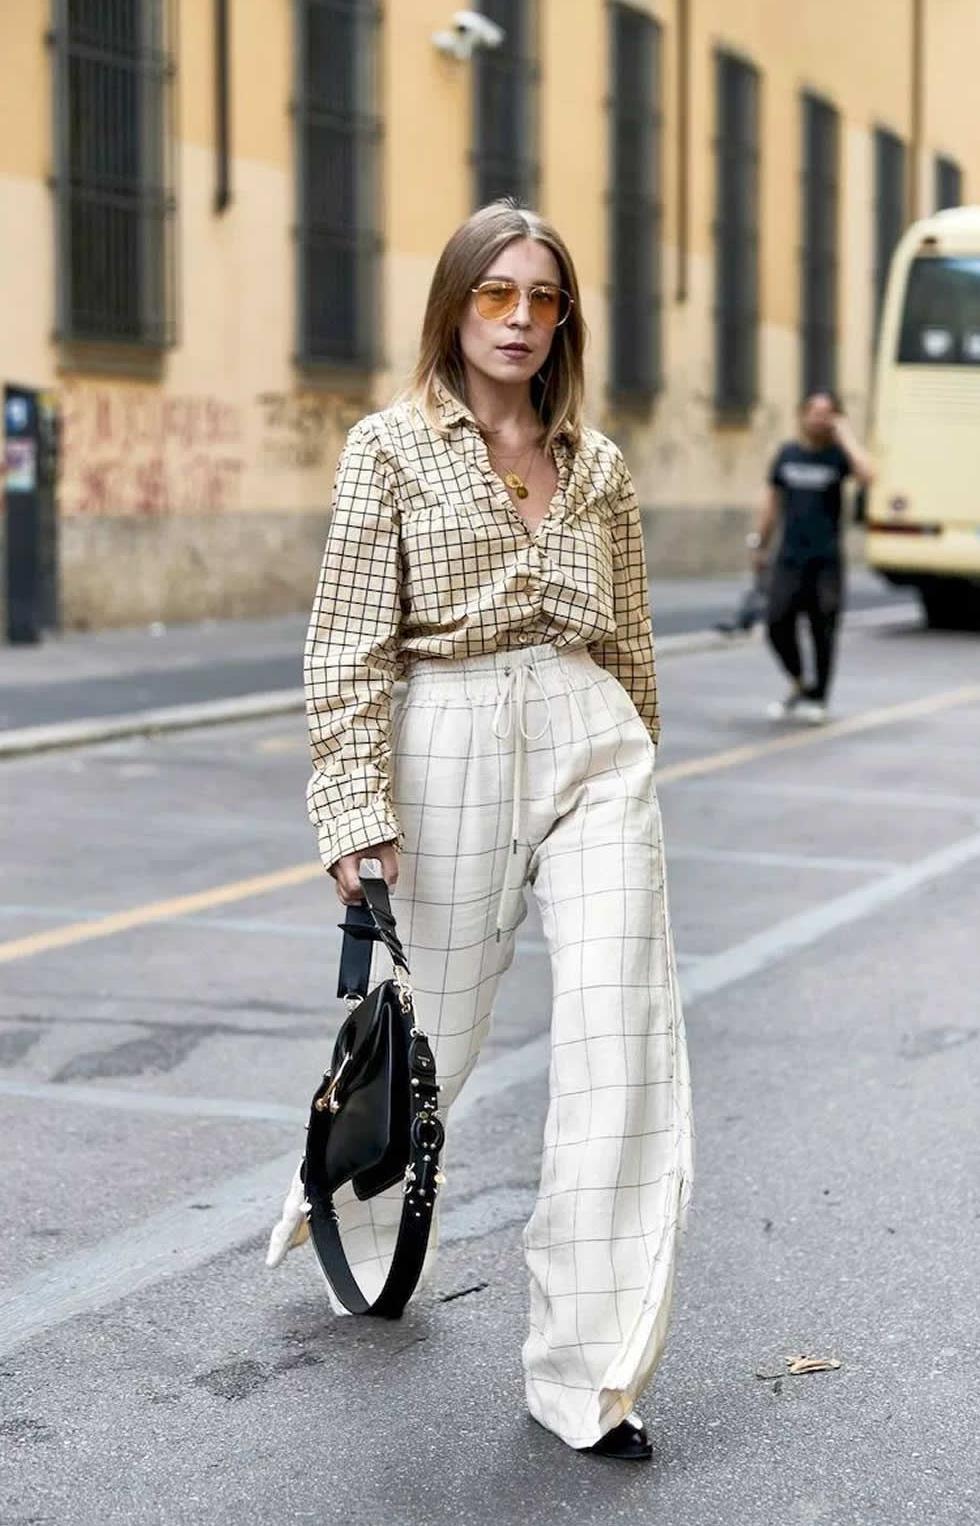 Smart Casual Outfit Ideas For Women: Relaxed Looks For Business Hours 2022